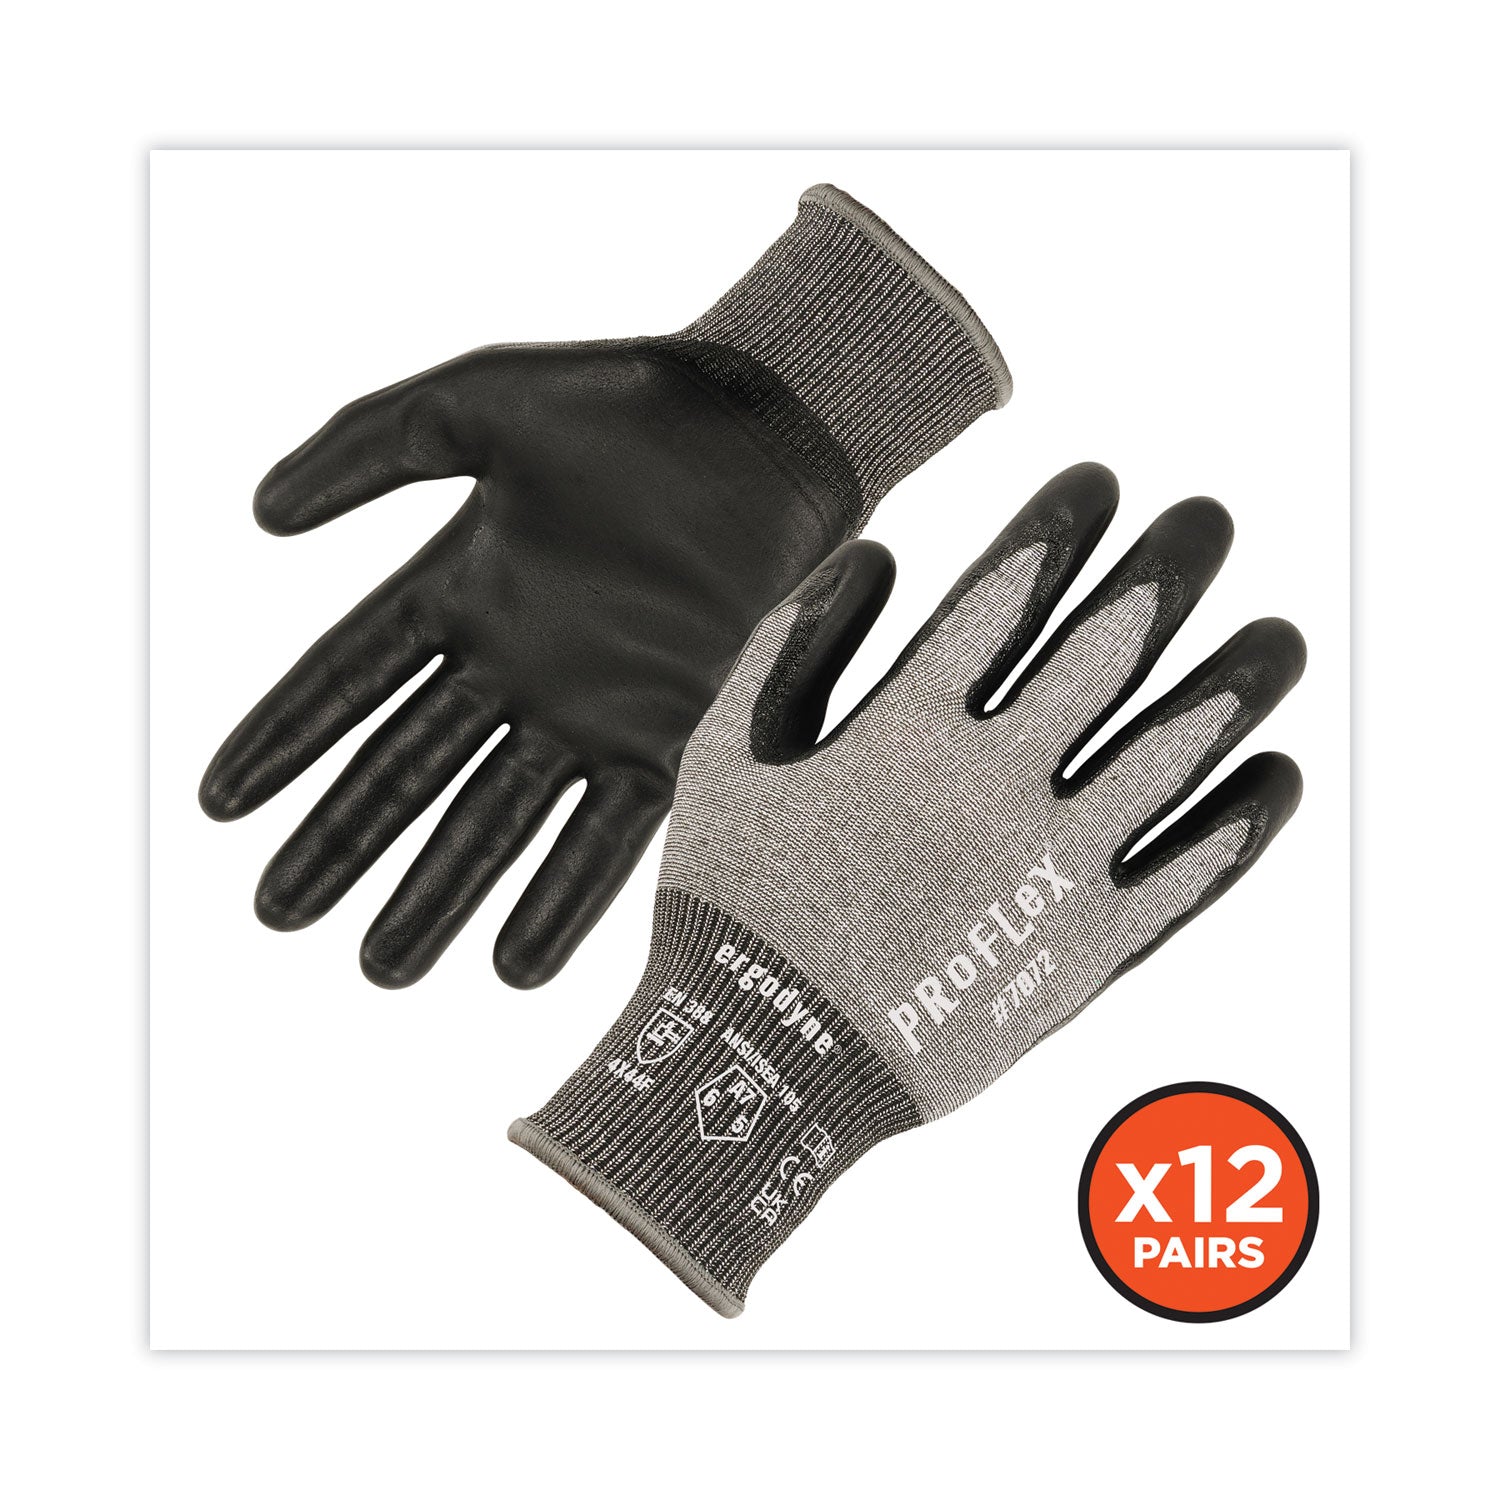 proflex-7072-ansi-a7-nitrile-coated-cr-gloves-gray-medium-12-pairs-pack-ships-in-1-3-business-days_ego10303 - 2